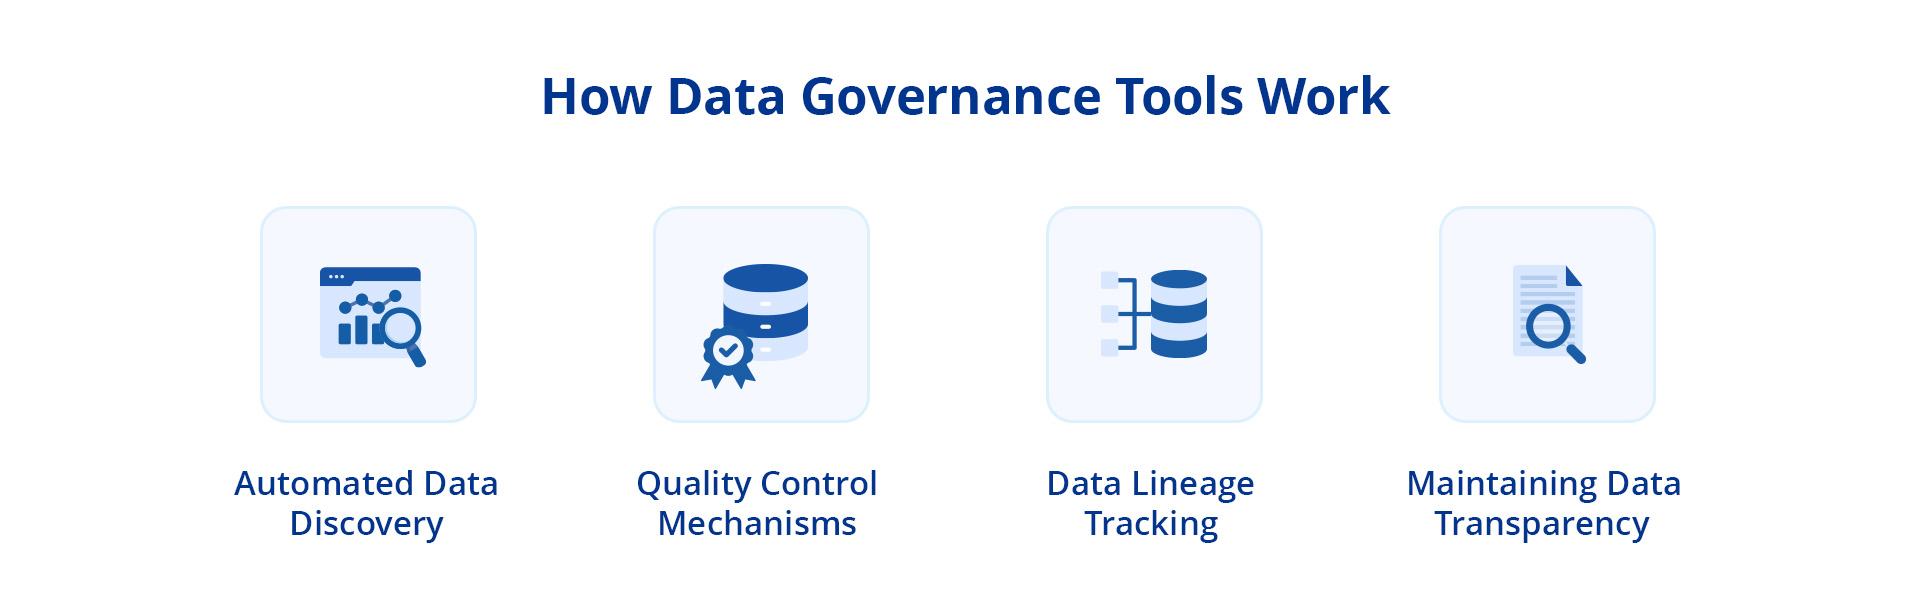 Showcasing the process of how data governance tools work